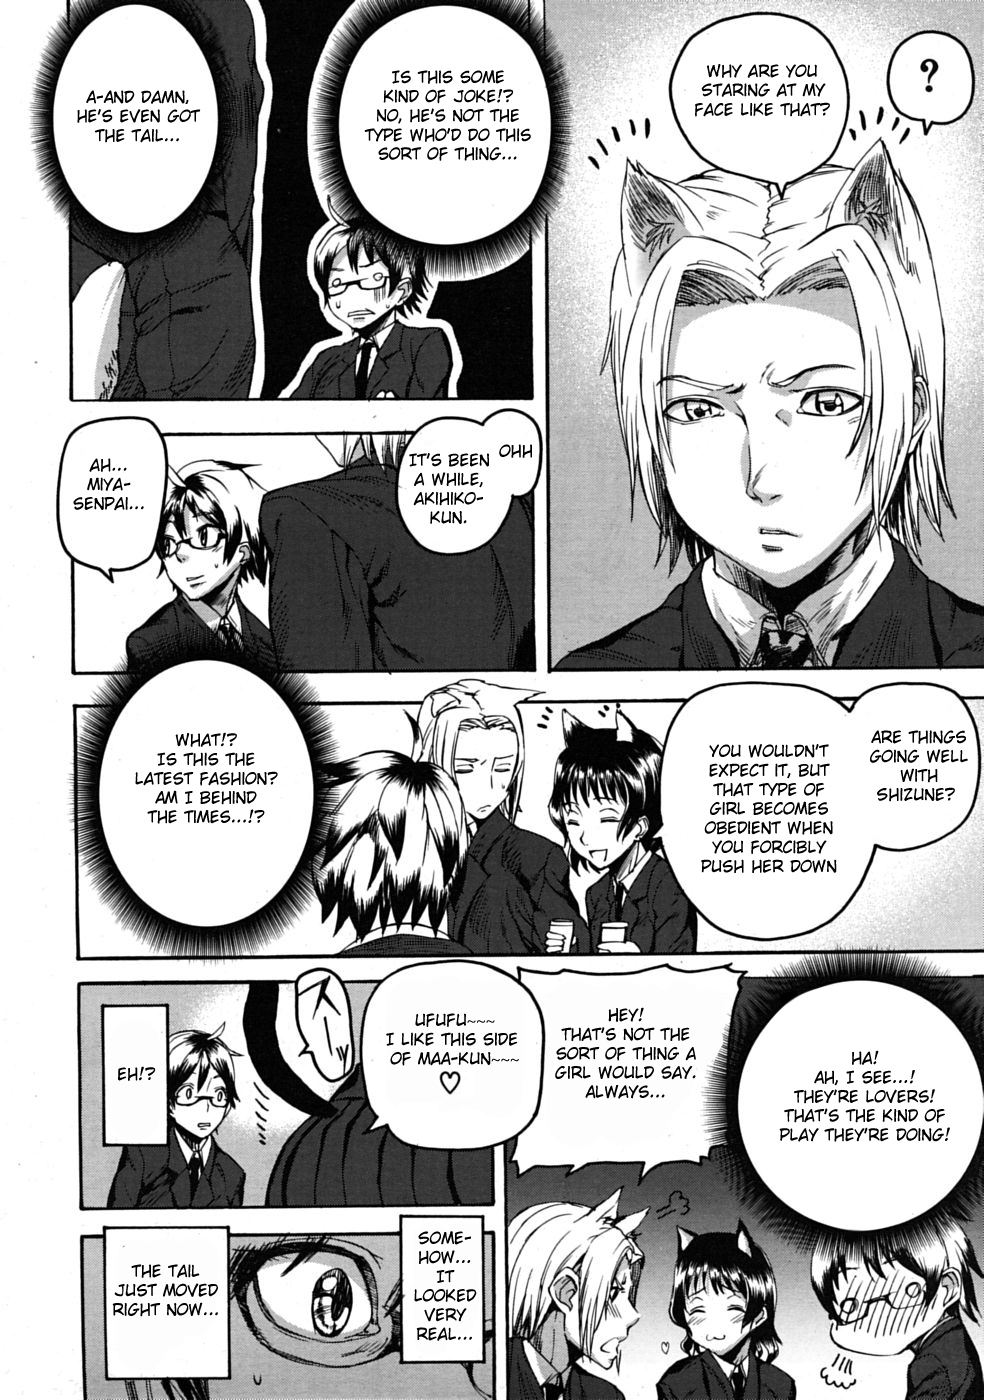 [Masato Ashiomi] Tail’s Emotion [ENG] page 4 full